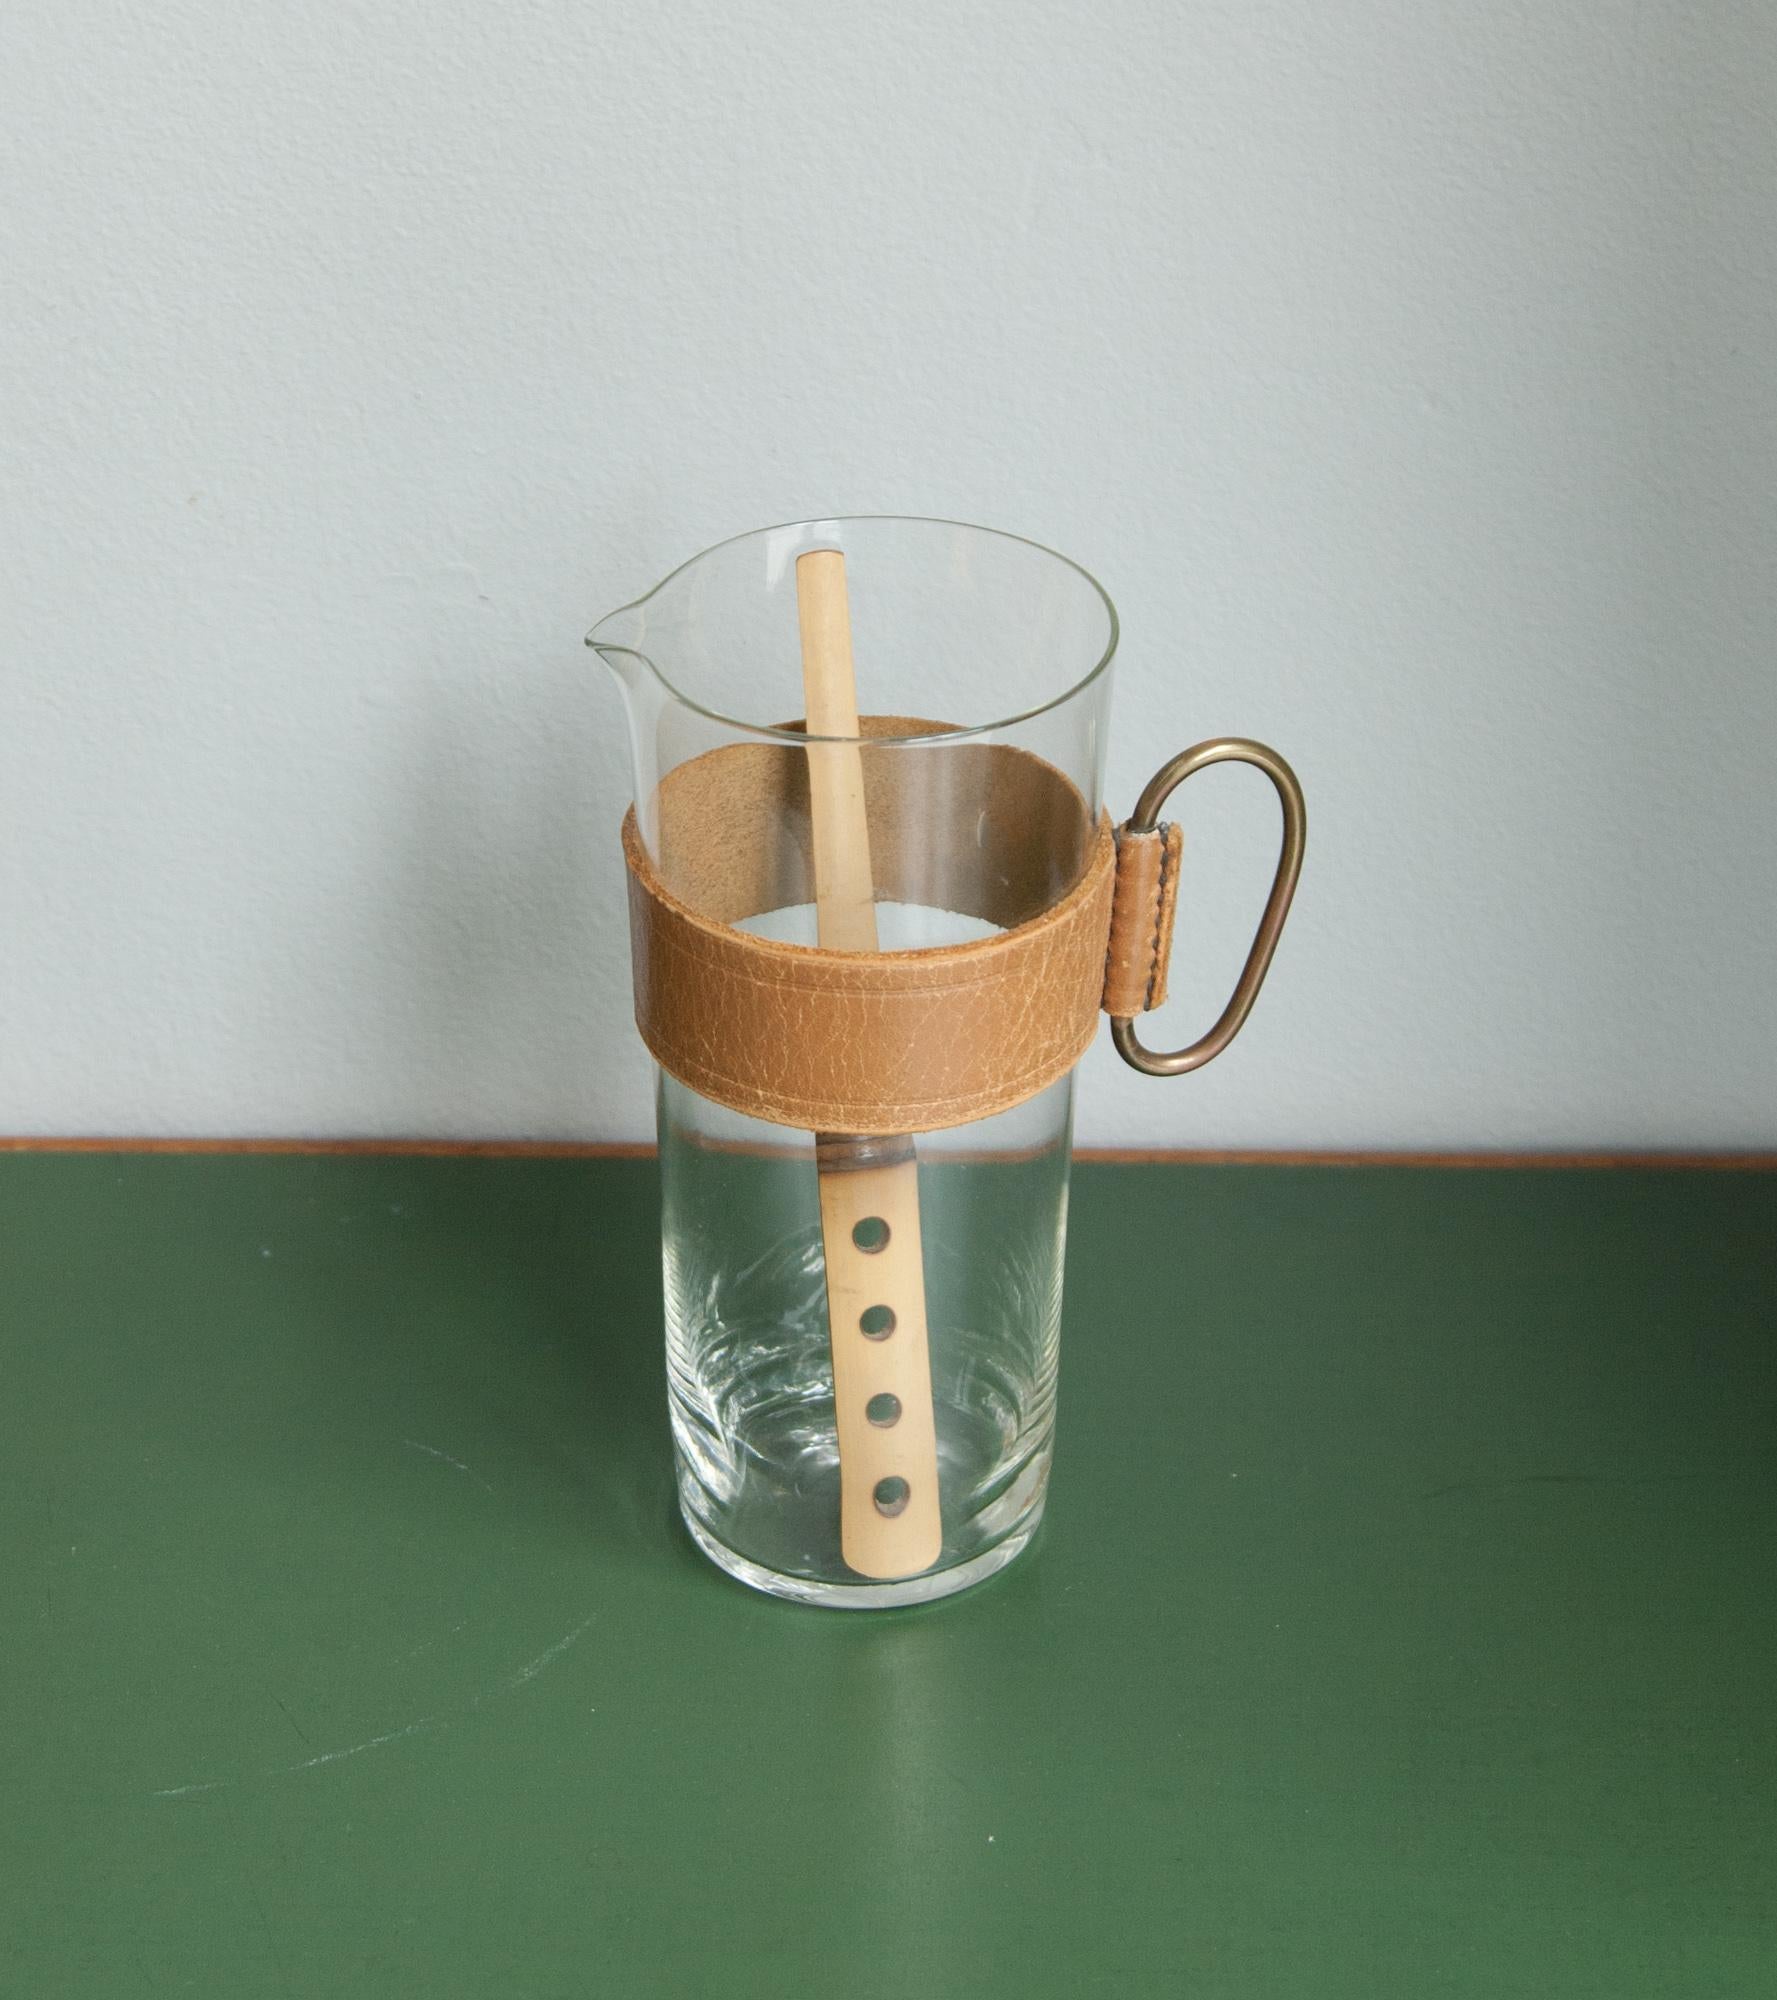 A glass pitcher with leather sleeve handle by Carl Auböck II, Vienna, 1950s.
A brass handle is attached to the leather sleeve and a drink stirrer in bamboo with four circular holes comes with the set. In excellent condition.